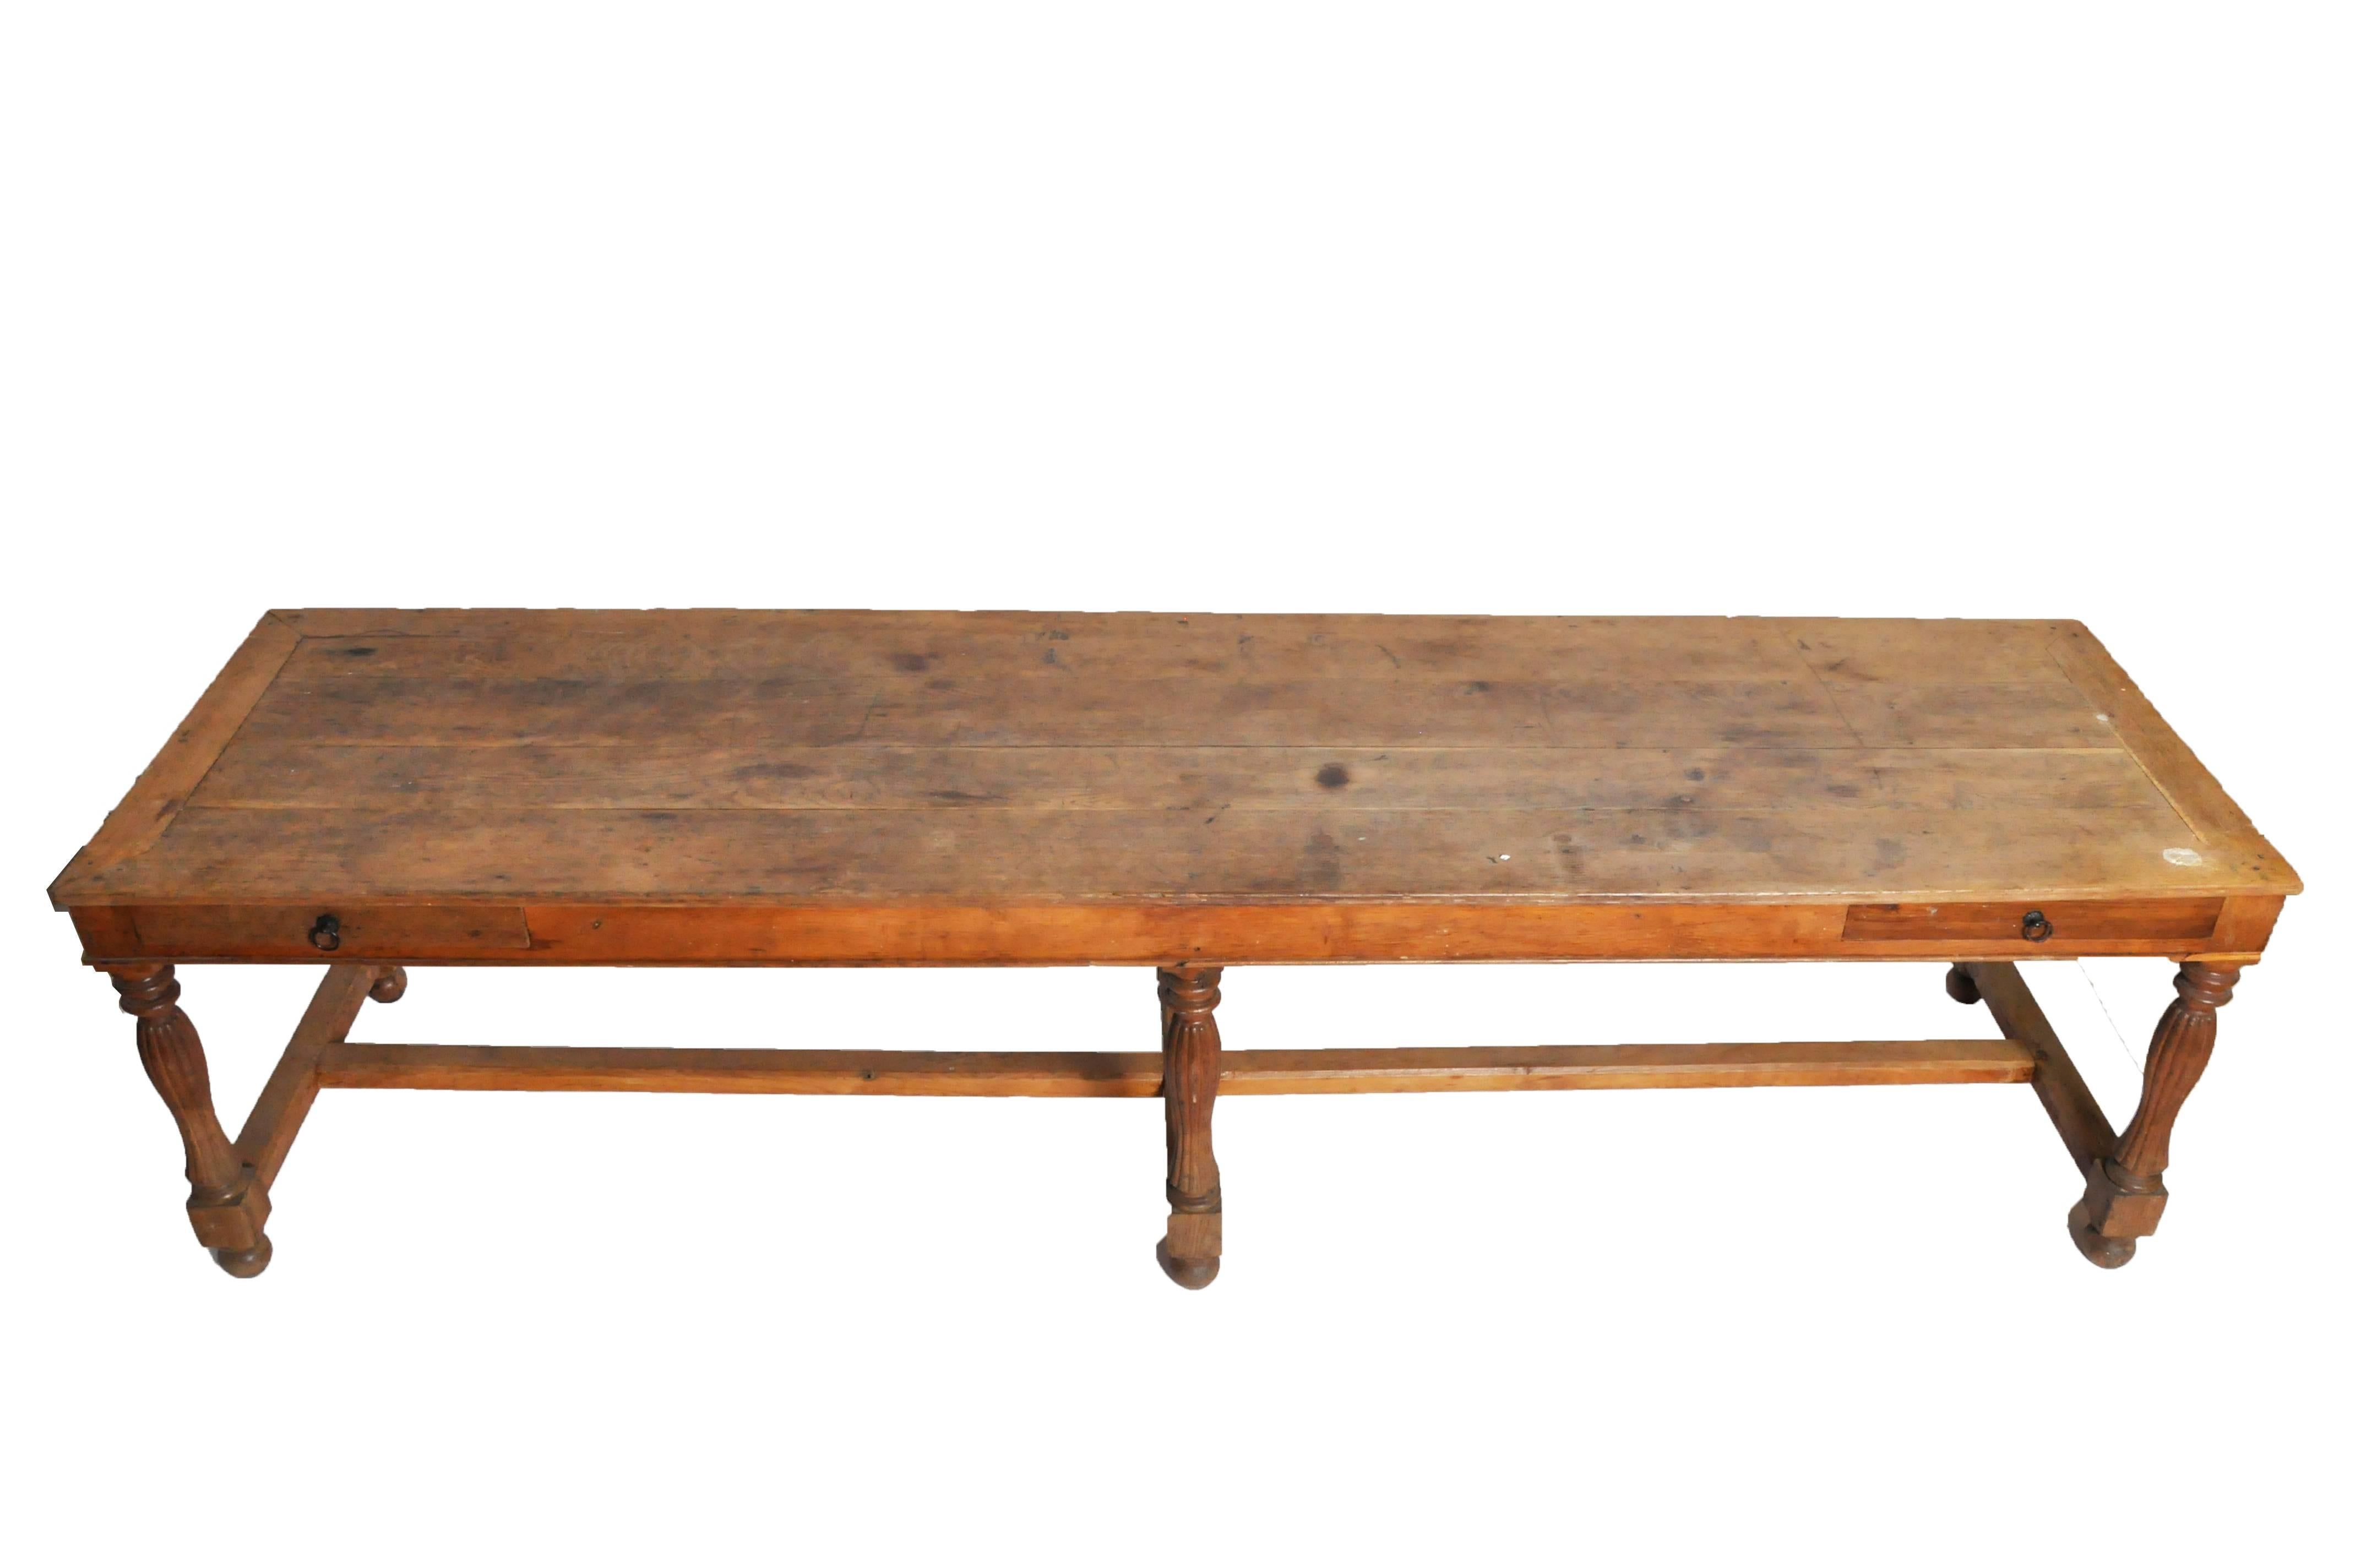 This dining table is from France and is made from oak and walnut wood, circa 19th century.